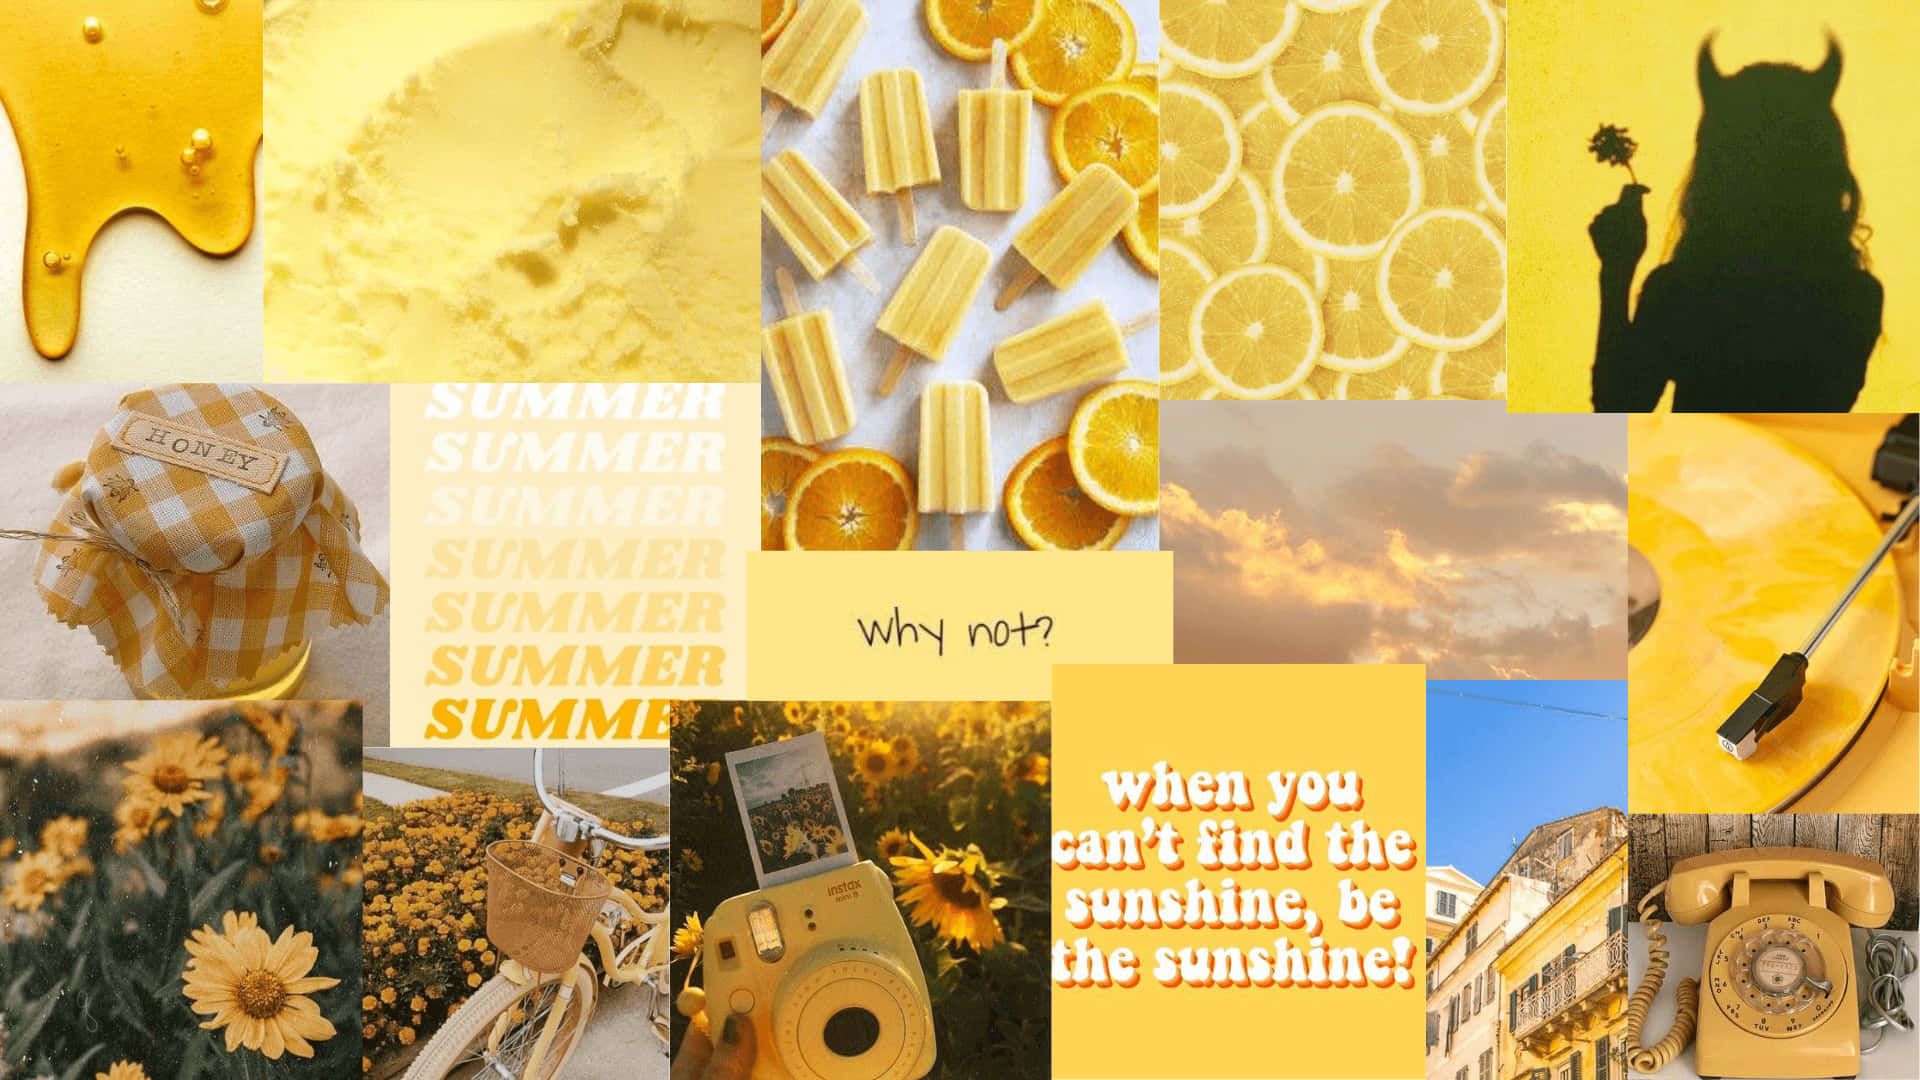 Free Yellow Aesthetic Collage Wallpaper Downloads, Yellow Aesthetic Collage Wallpaper for FREE